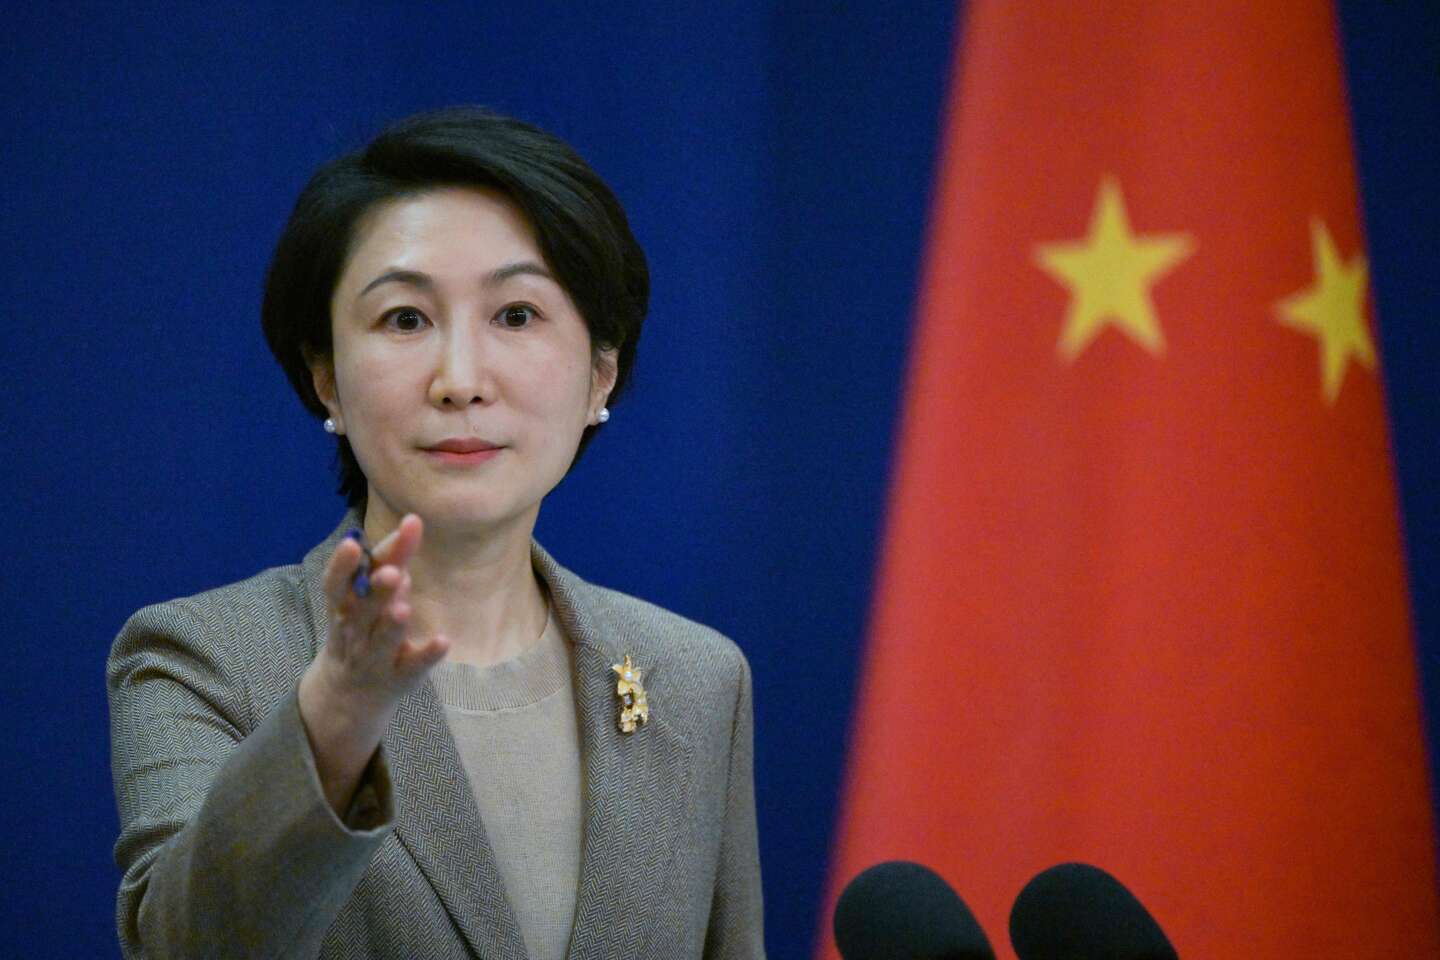 China says it “firmly opposes” any official exchange between Taiwan and the US